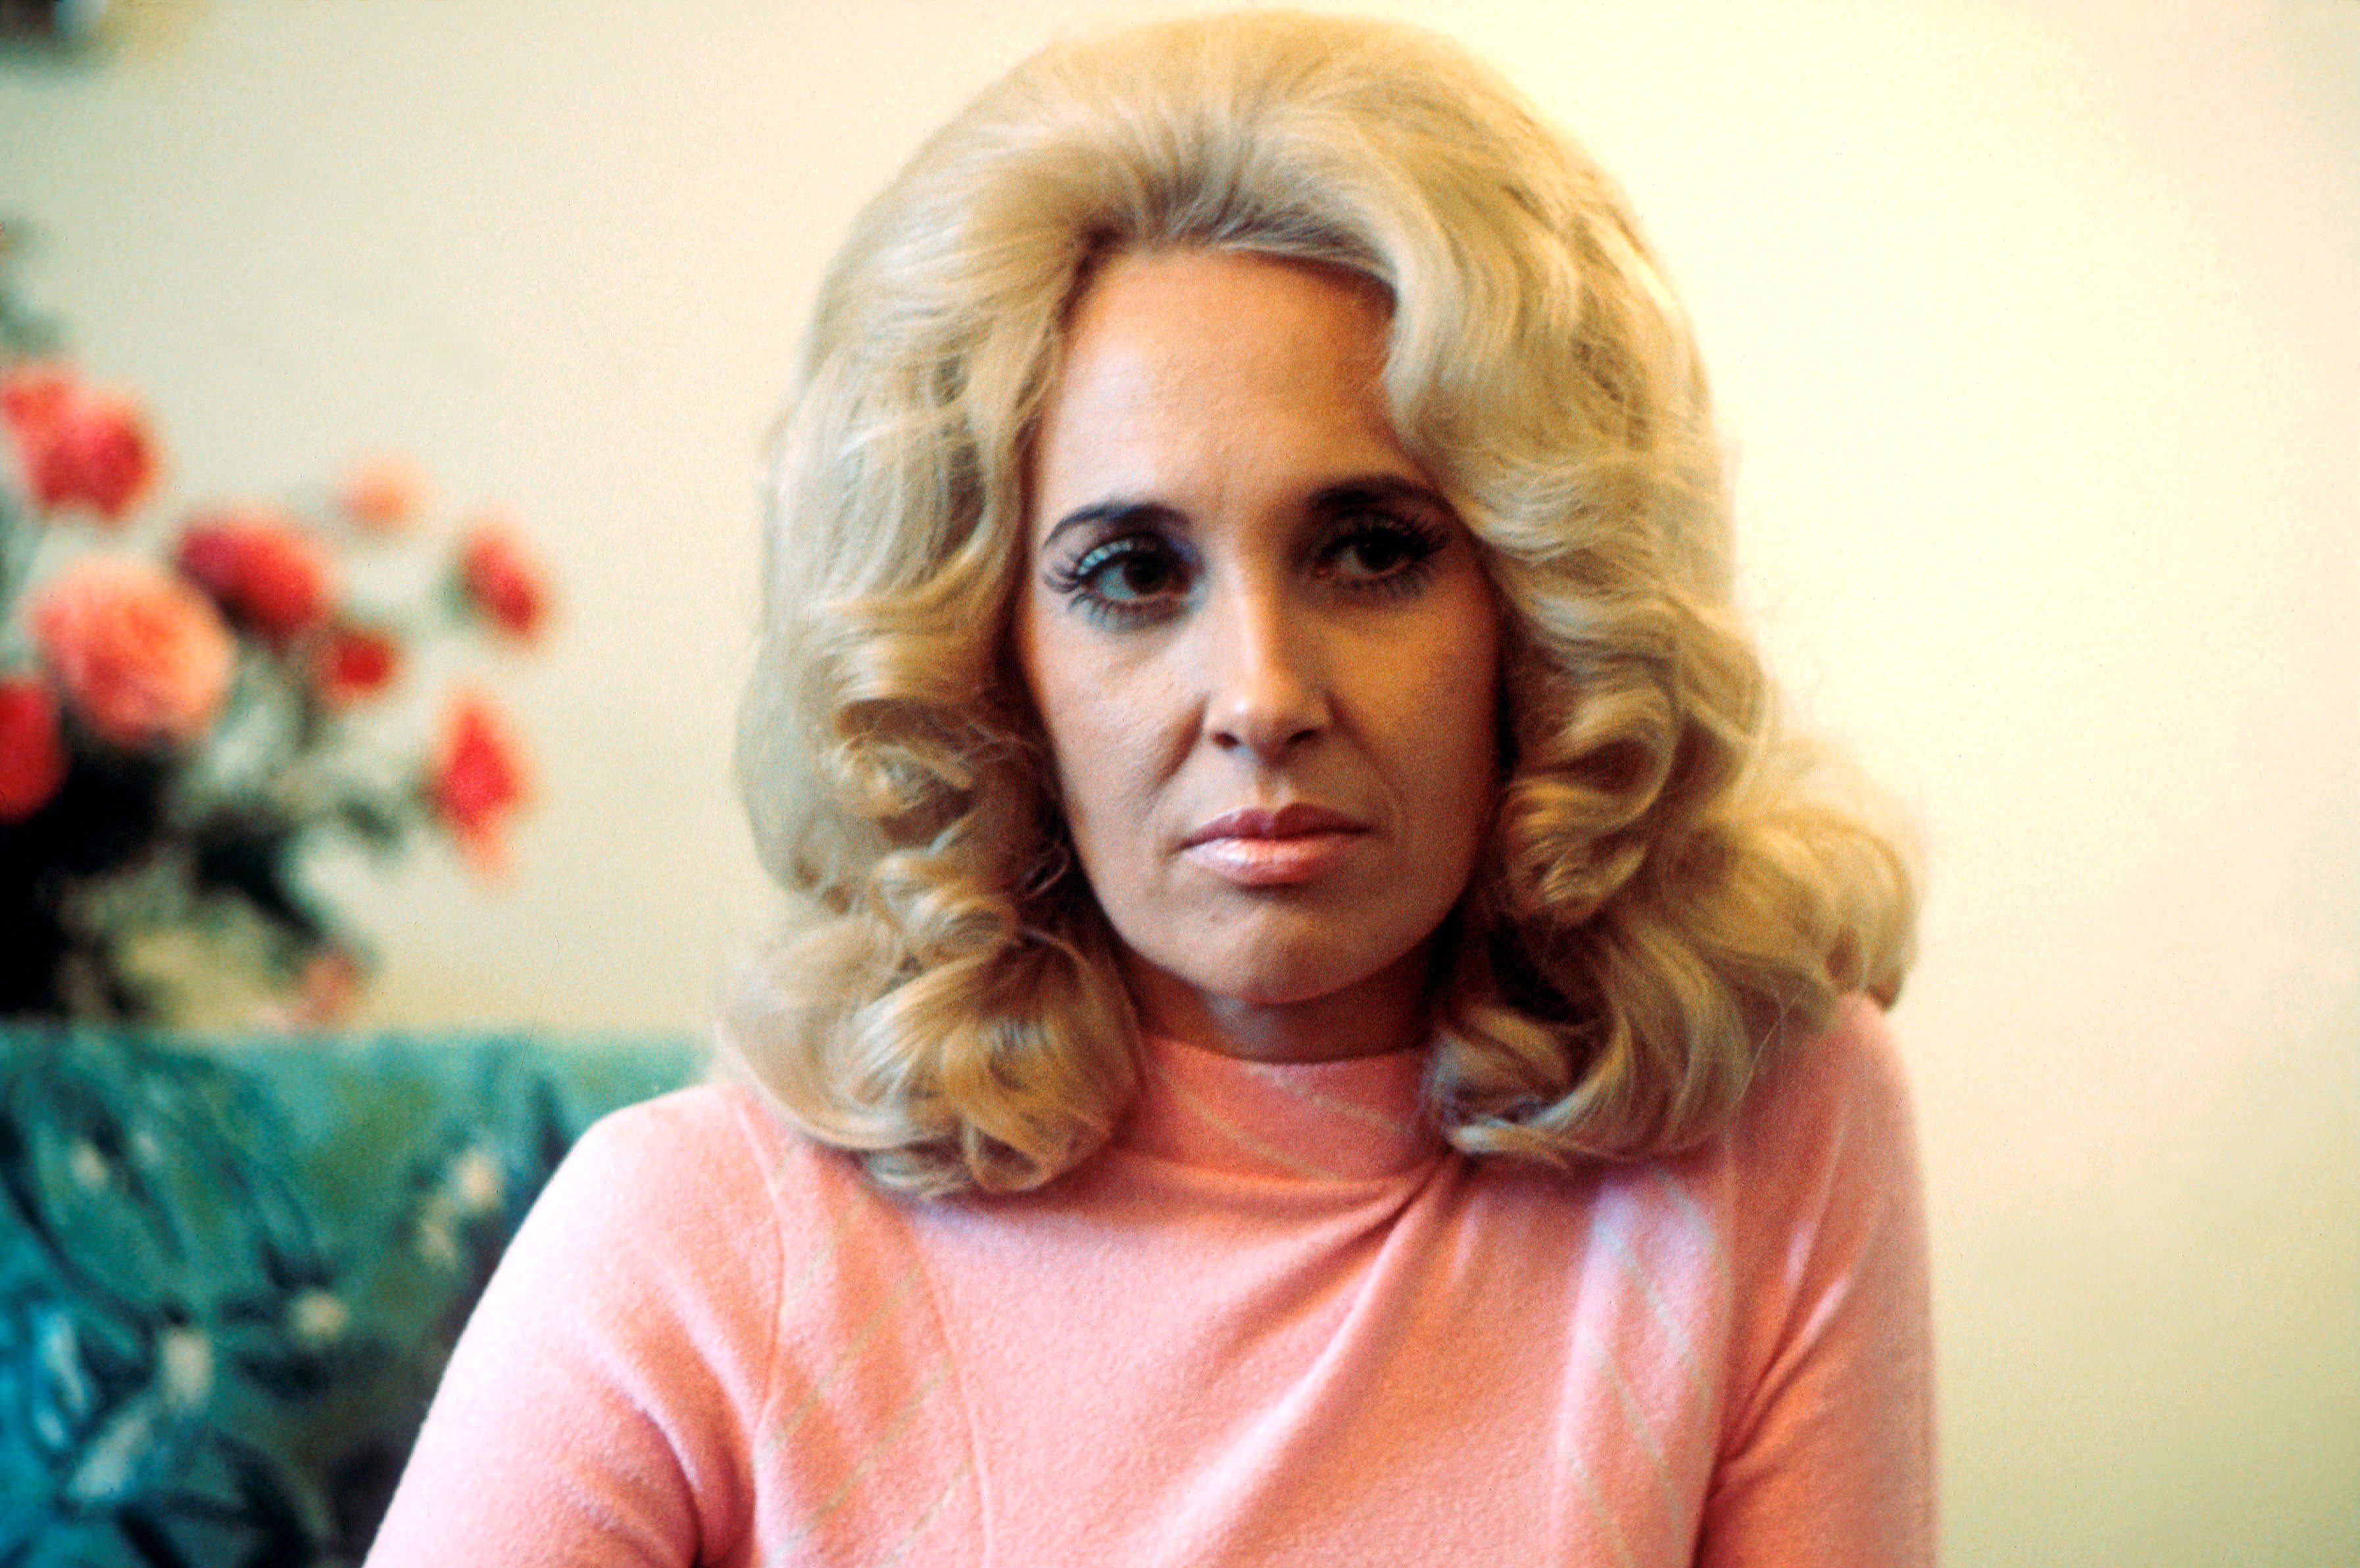 A photo of Tammy Wynette wearing a pink sweater